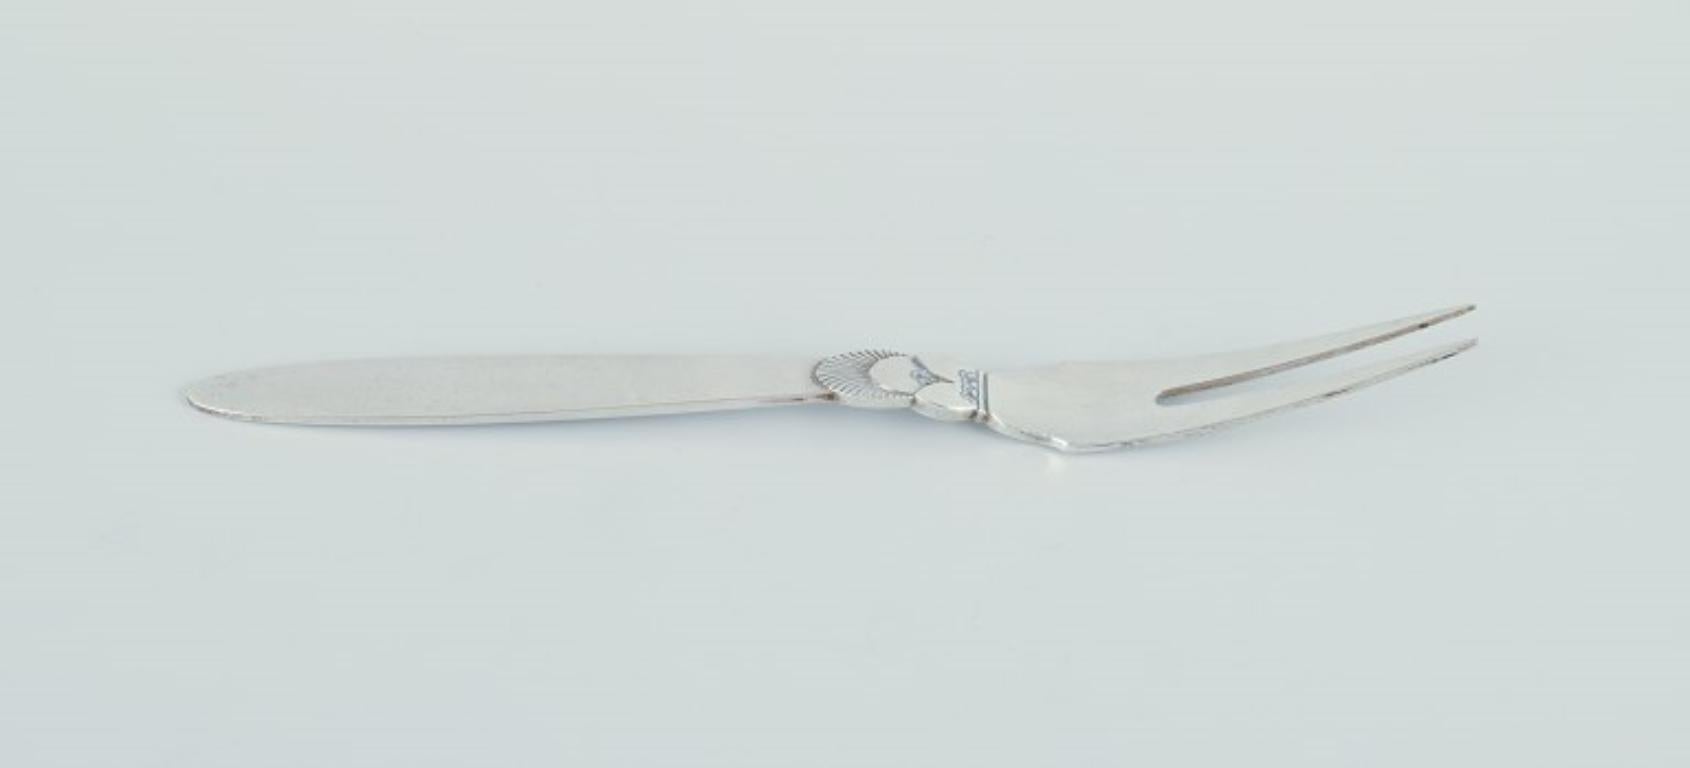 Georg Jensen Cactus. Meat fork in sterling silver.
Hallmarked after 1944.
In perfect condition.
Dimensions: Length 19.7 cm.